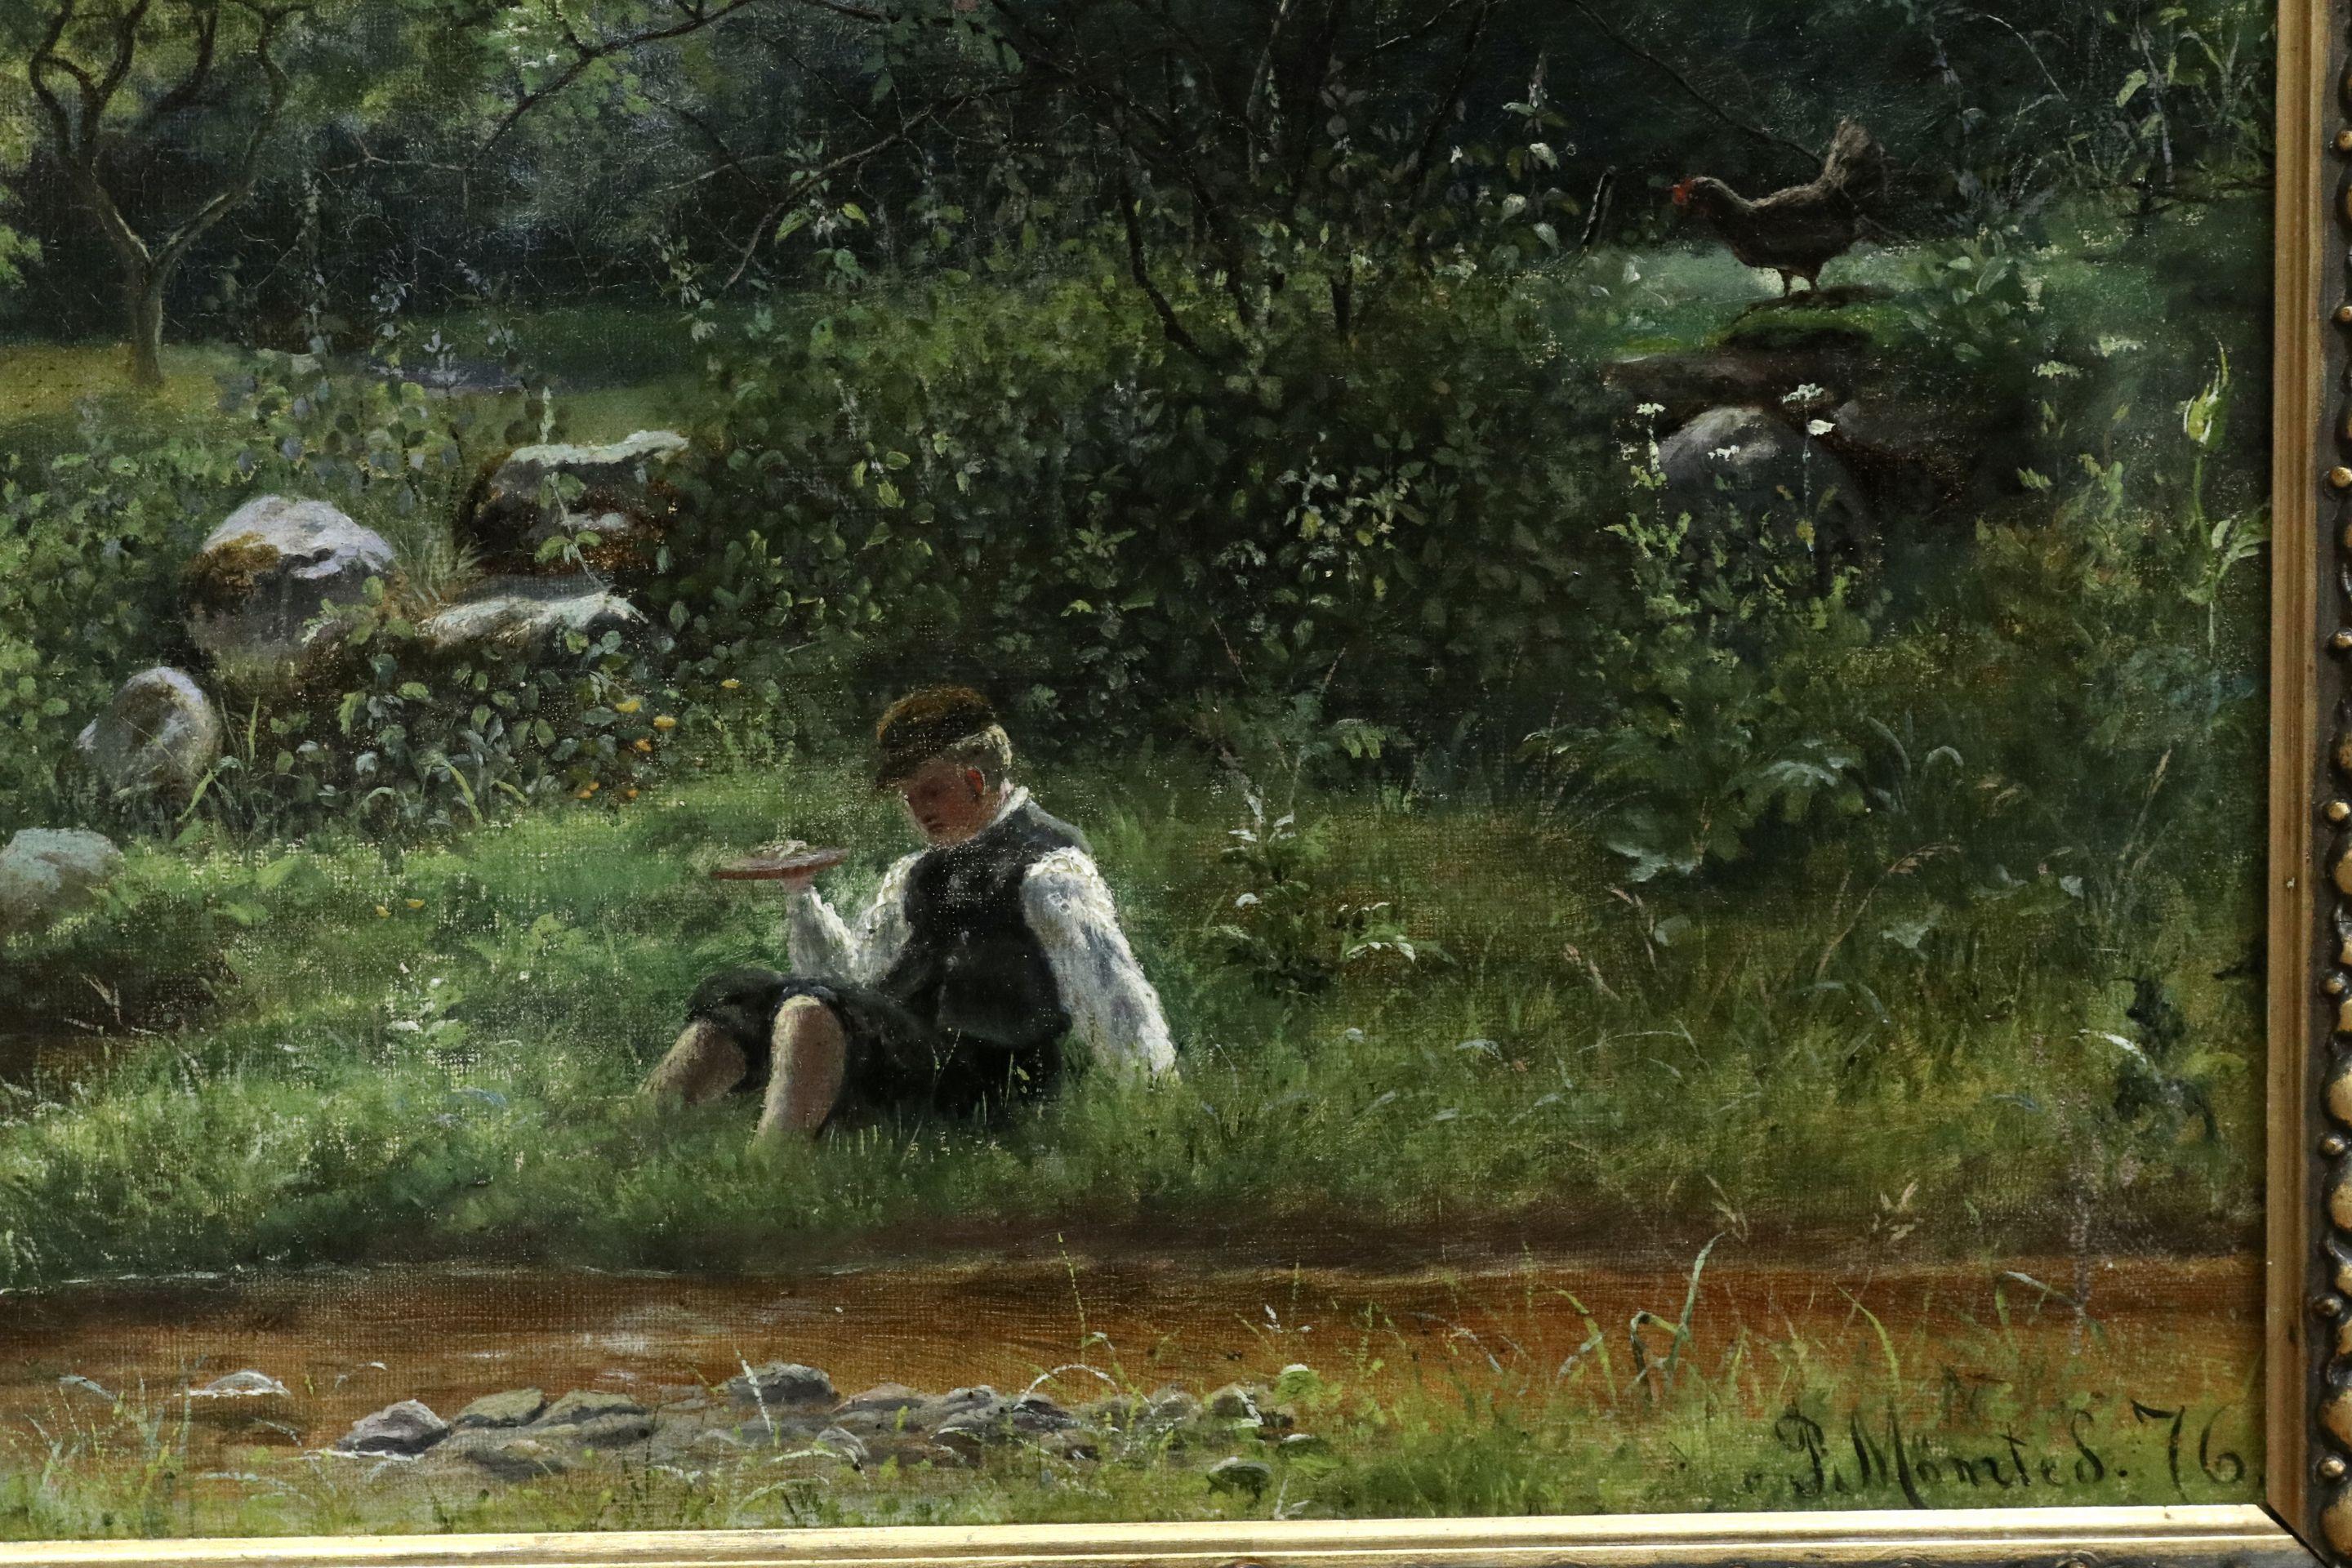 Young Boy Fishing by Stream - 19th Century Oil, Figures in Landscape by Monsted - Realist Painting by Peder Mørk Mønsted